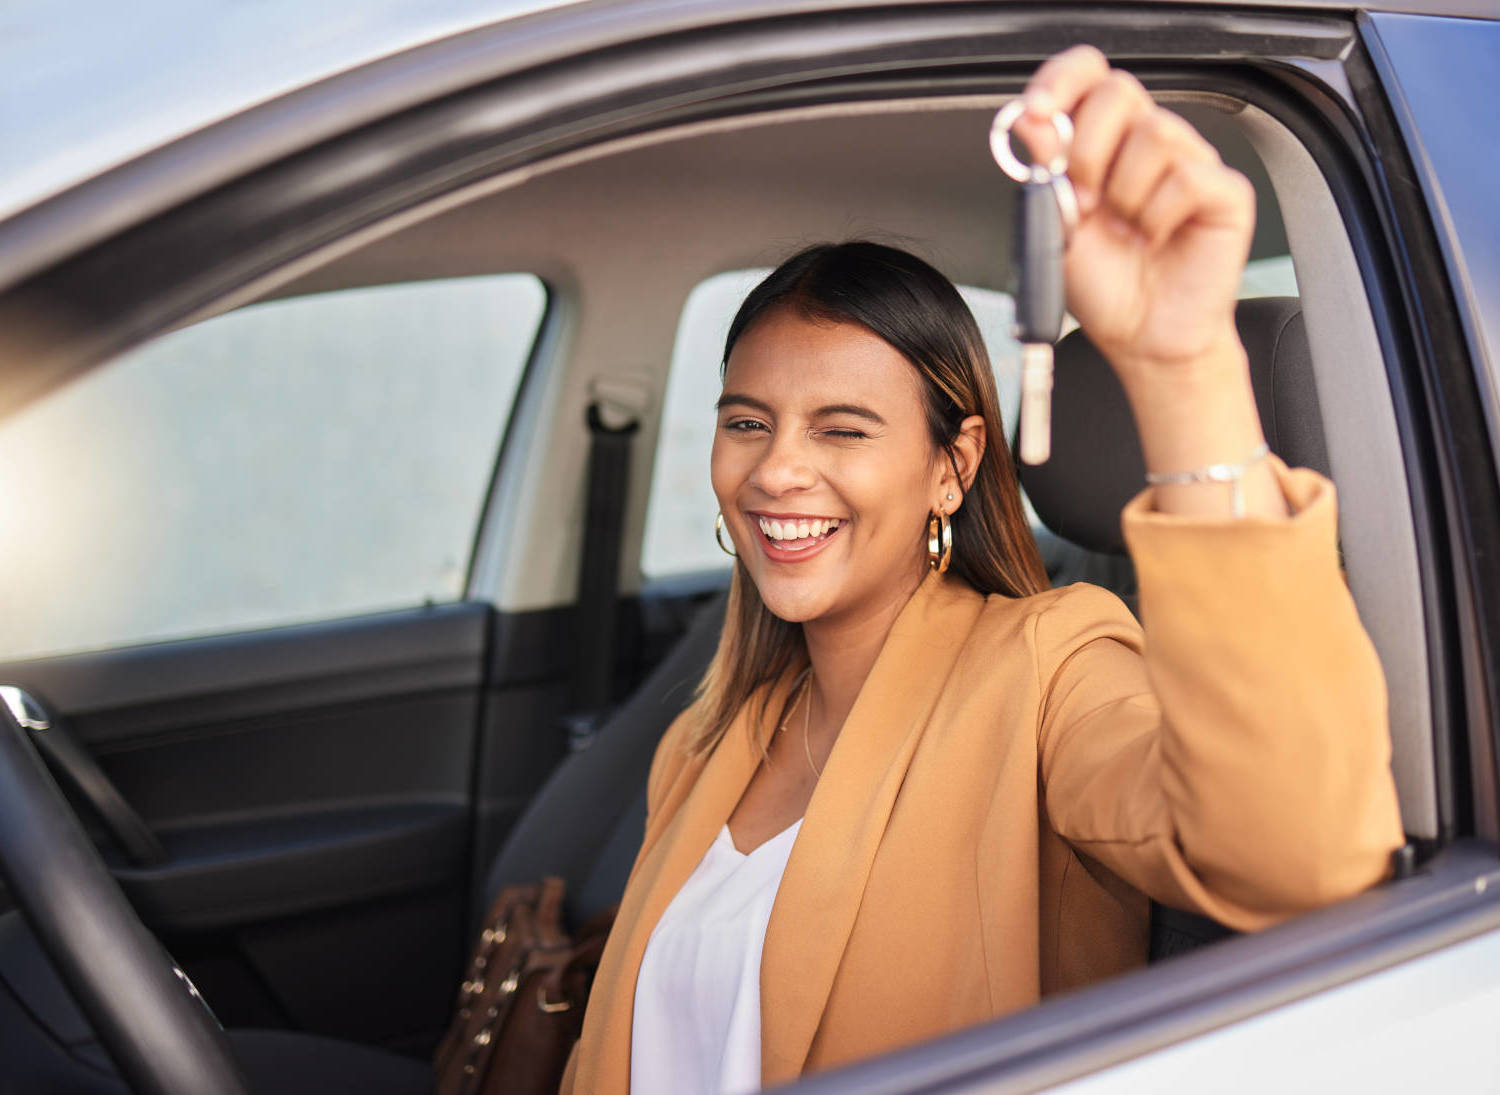 A woman sitting in her car, holding the keys and smiling